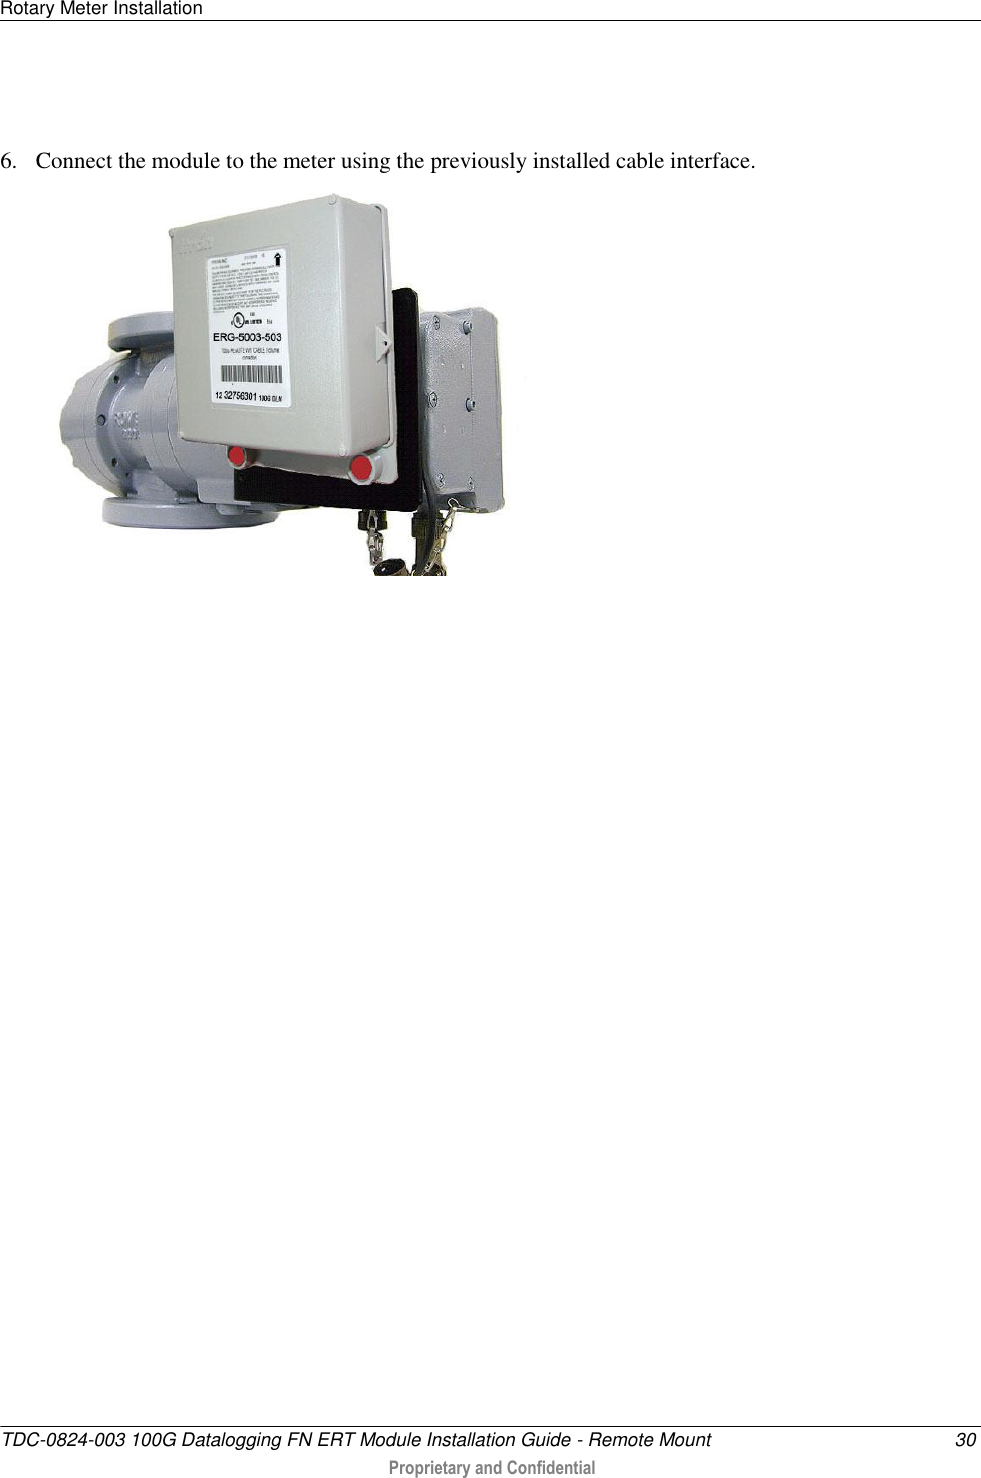 Rotary Meter Installation   TDC-0824-003 100G Datalogging FN ERT Module Installation Guide - Remote Mount  30  Proprietary and Confidential     6. Connect the module to the meter using the previously installed cable interface.     